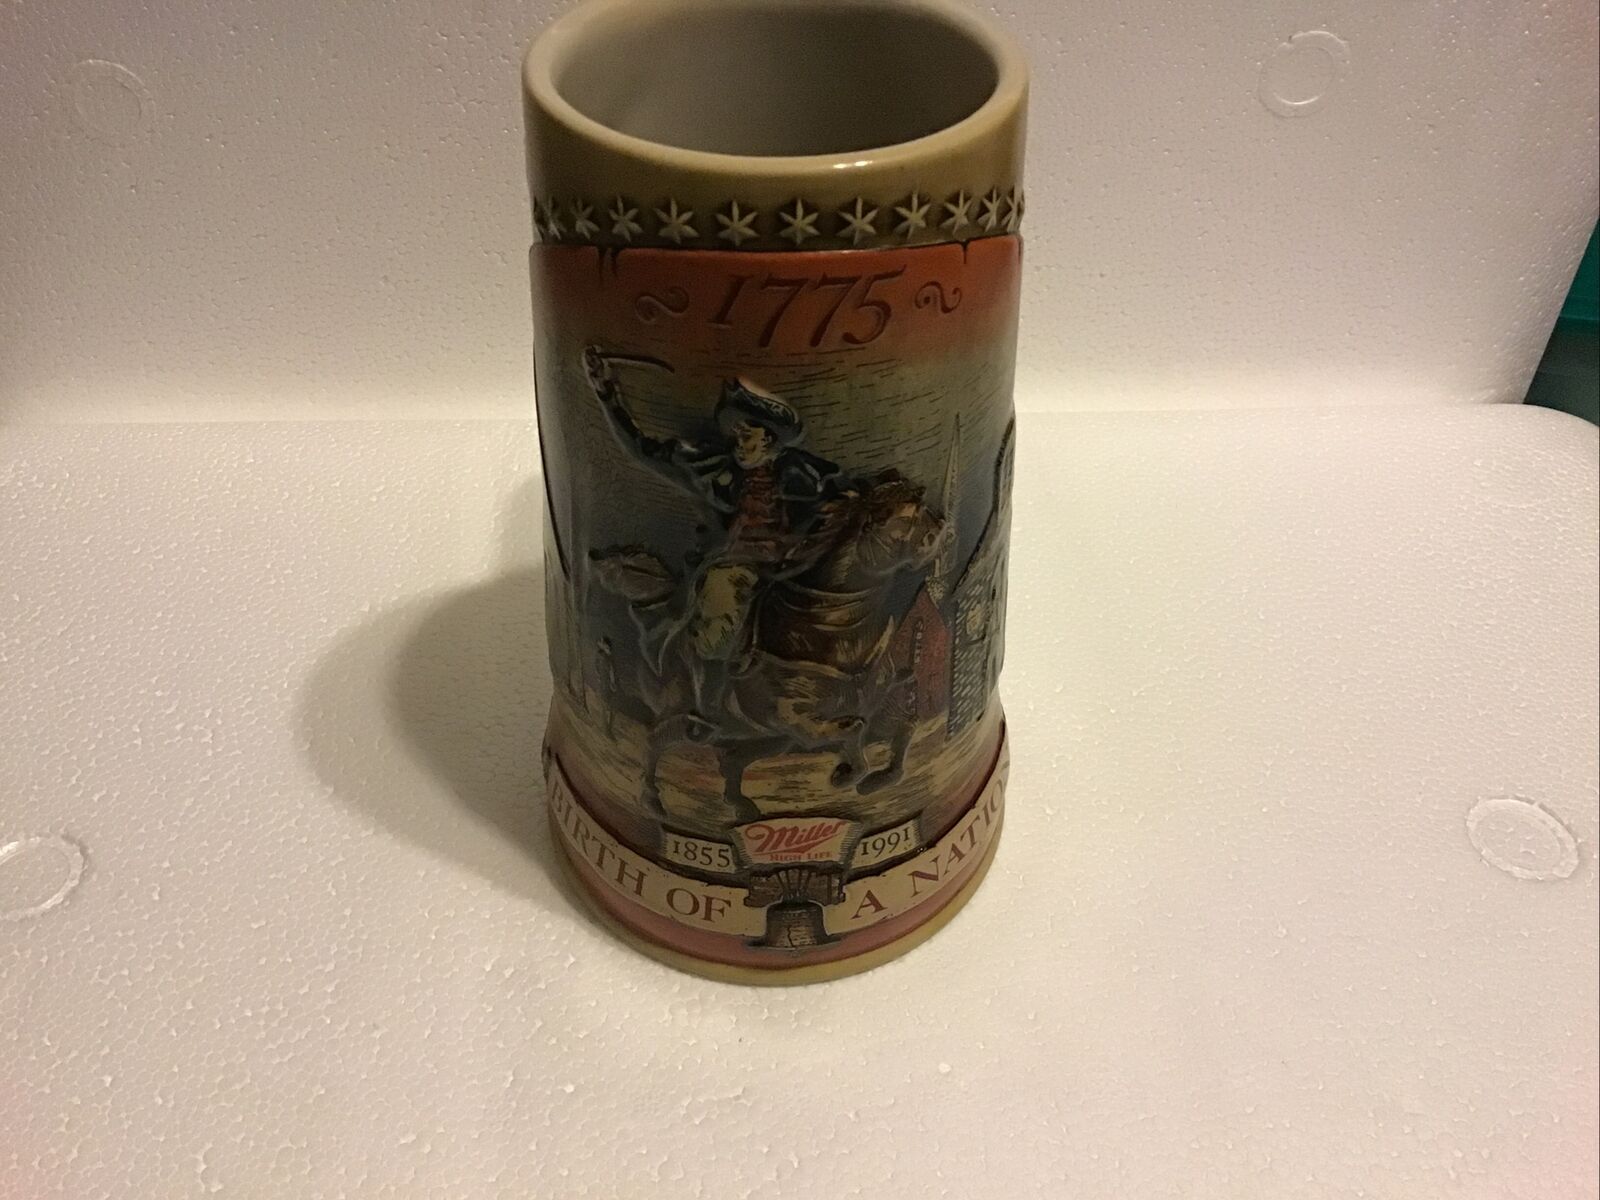 1991 Miller High Life Birth Of A Nation Stein -Paul Revere\'s Ride -1st in Series